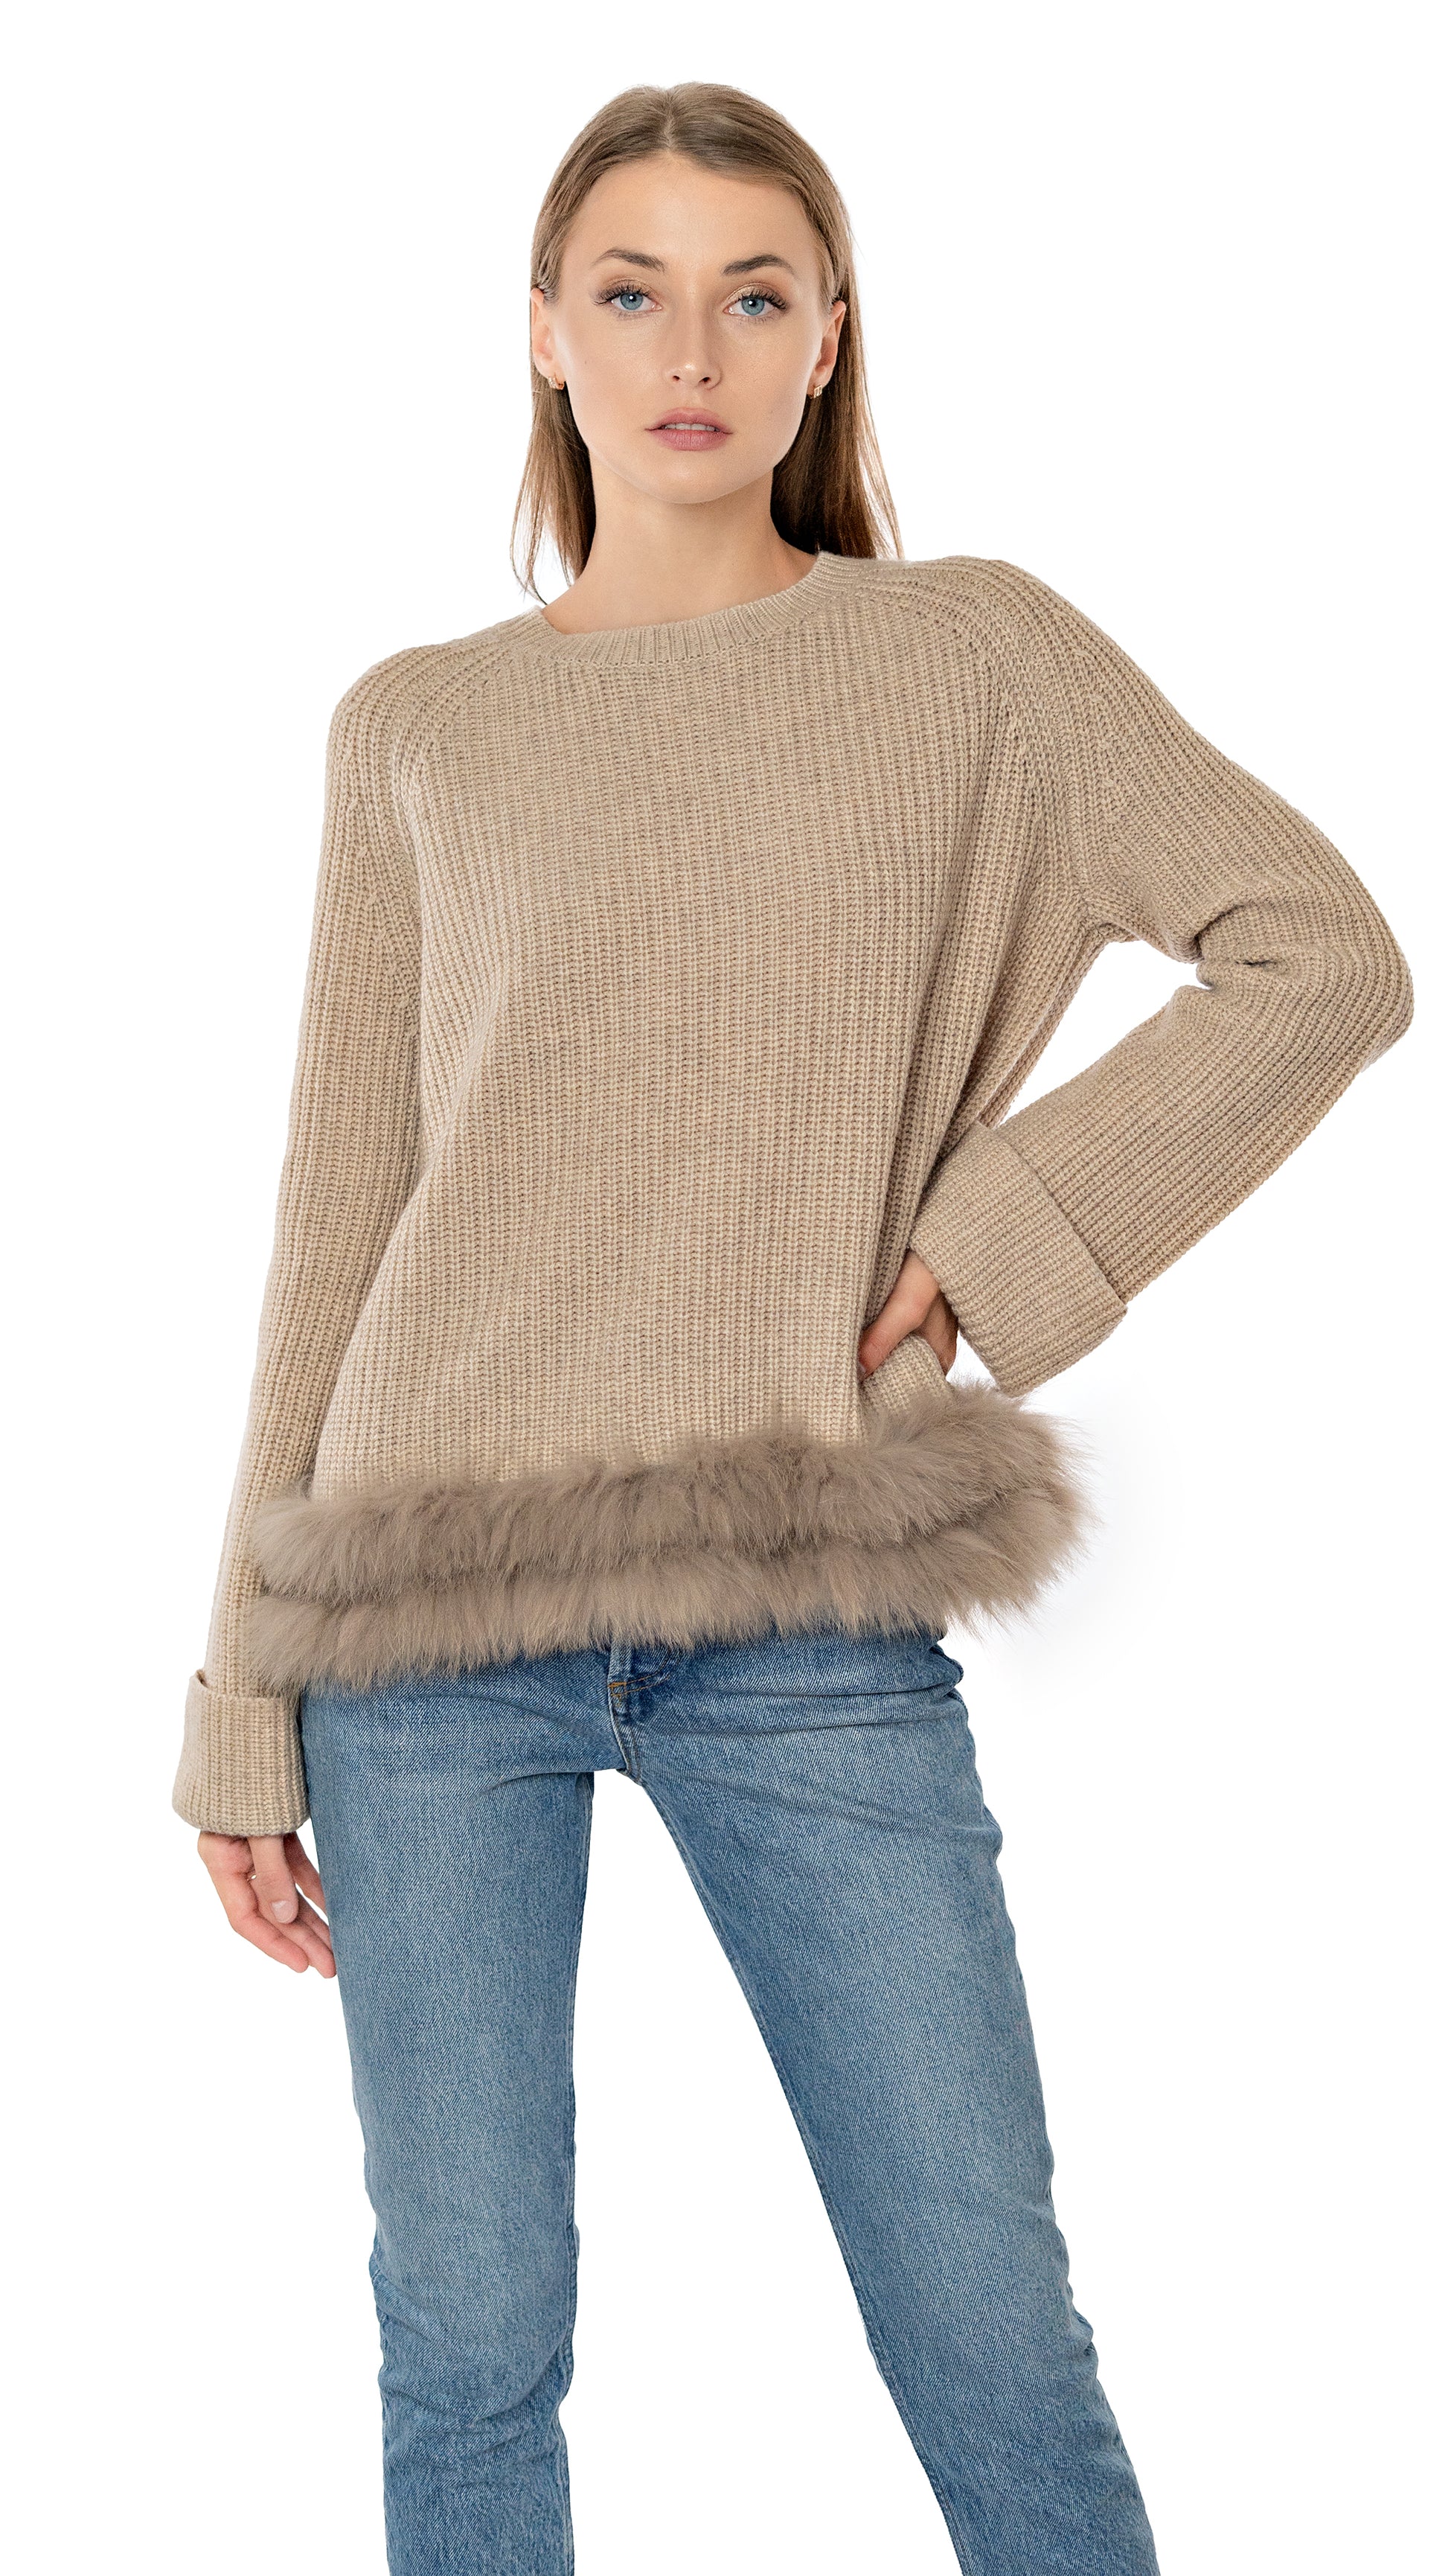 Max and Moi crew neck sweater with tone-on-tone fox fur applied to the bottom of the sweater